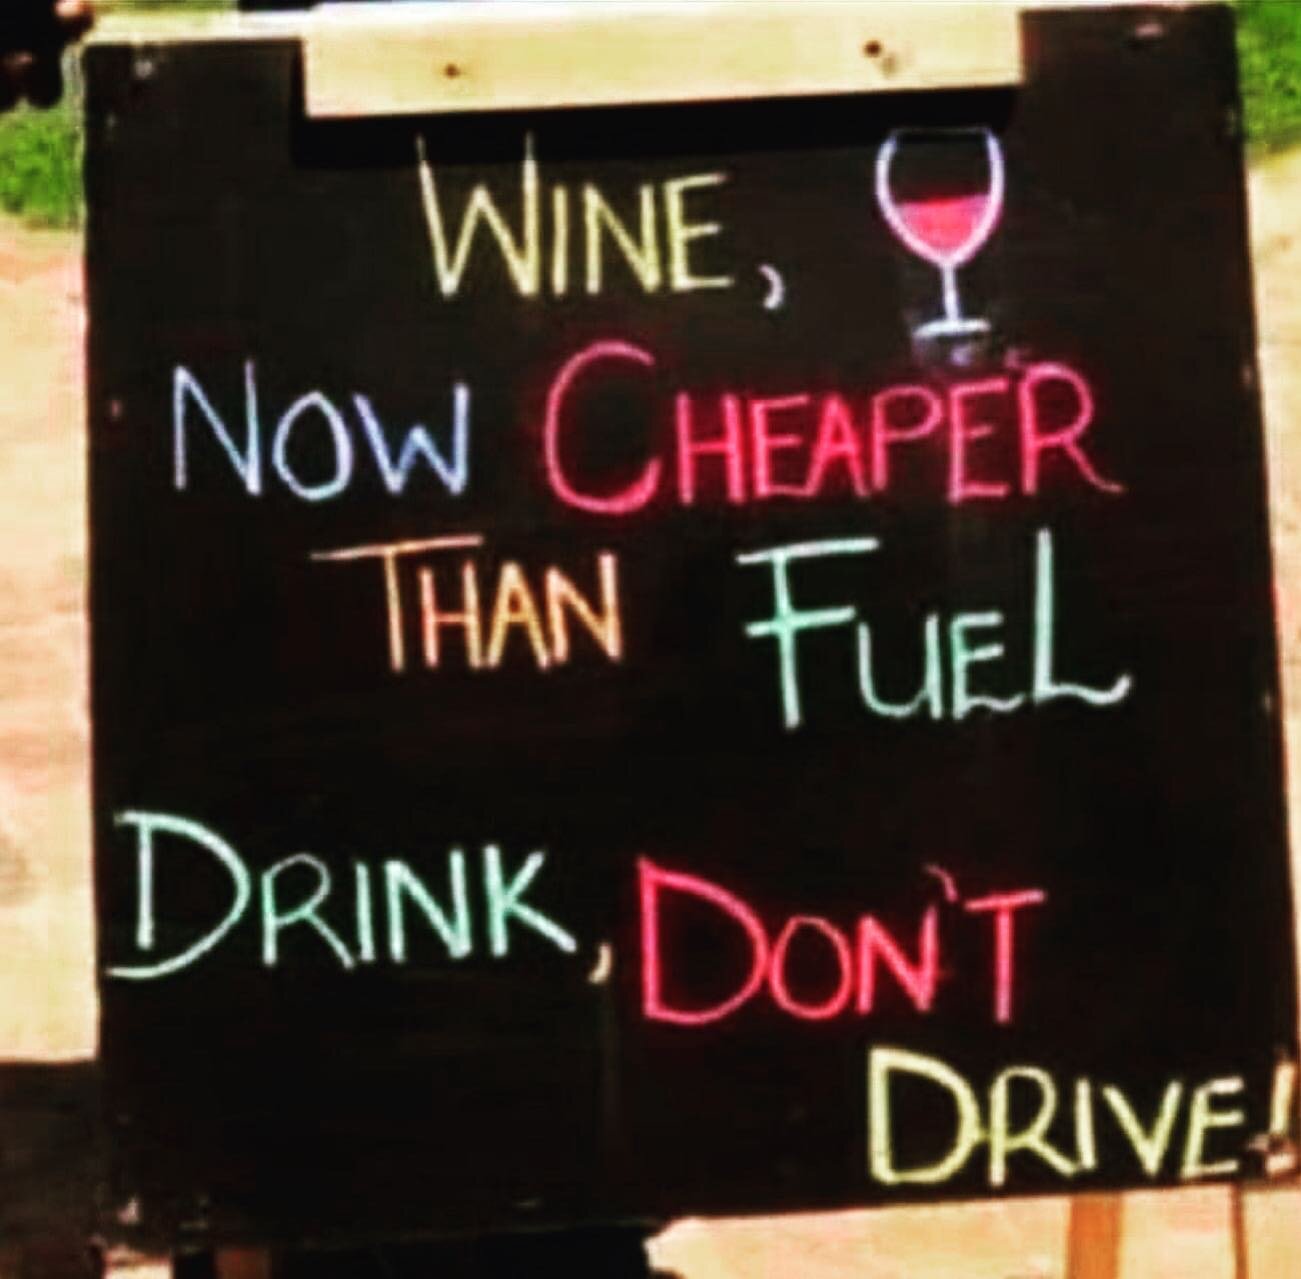 Yet another good reason to enjoy wine